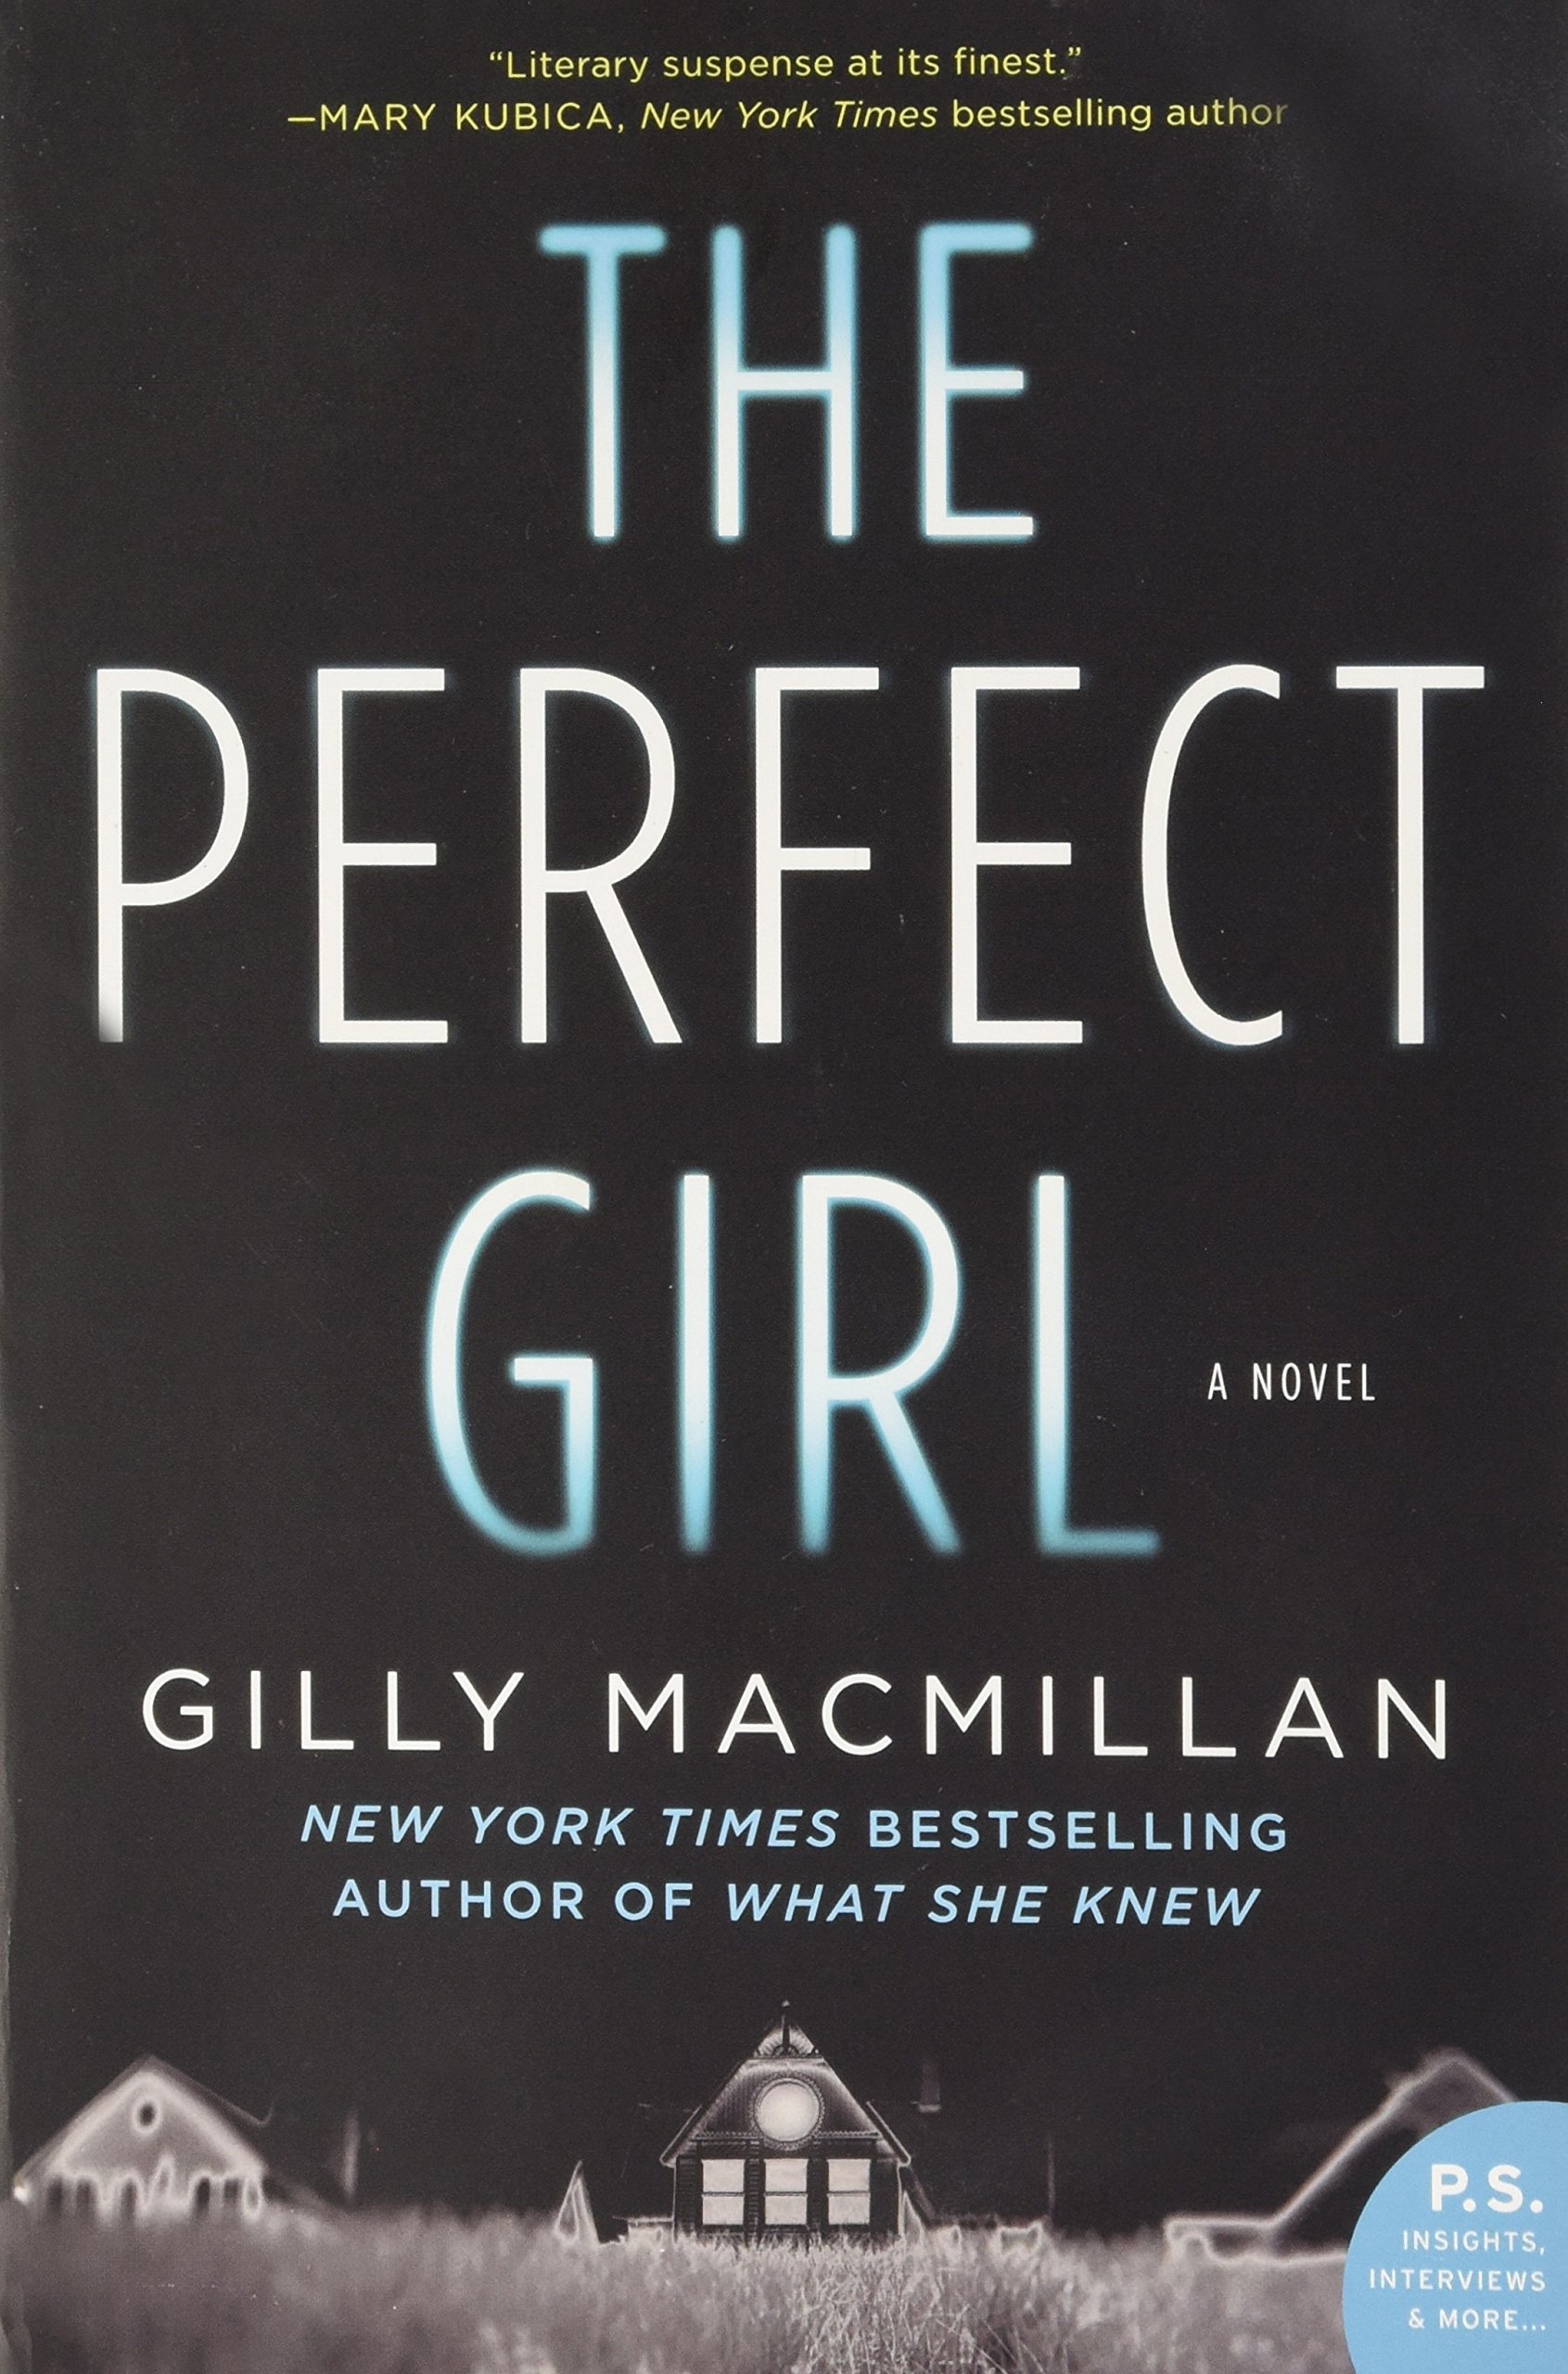 The Perfect Girl by Gilly Macmillan